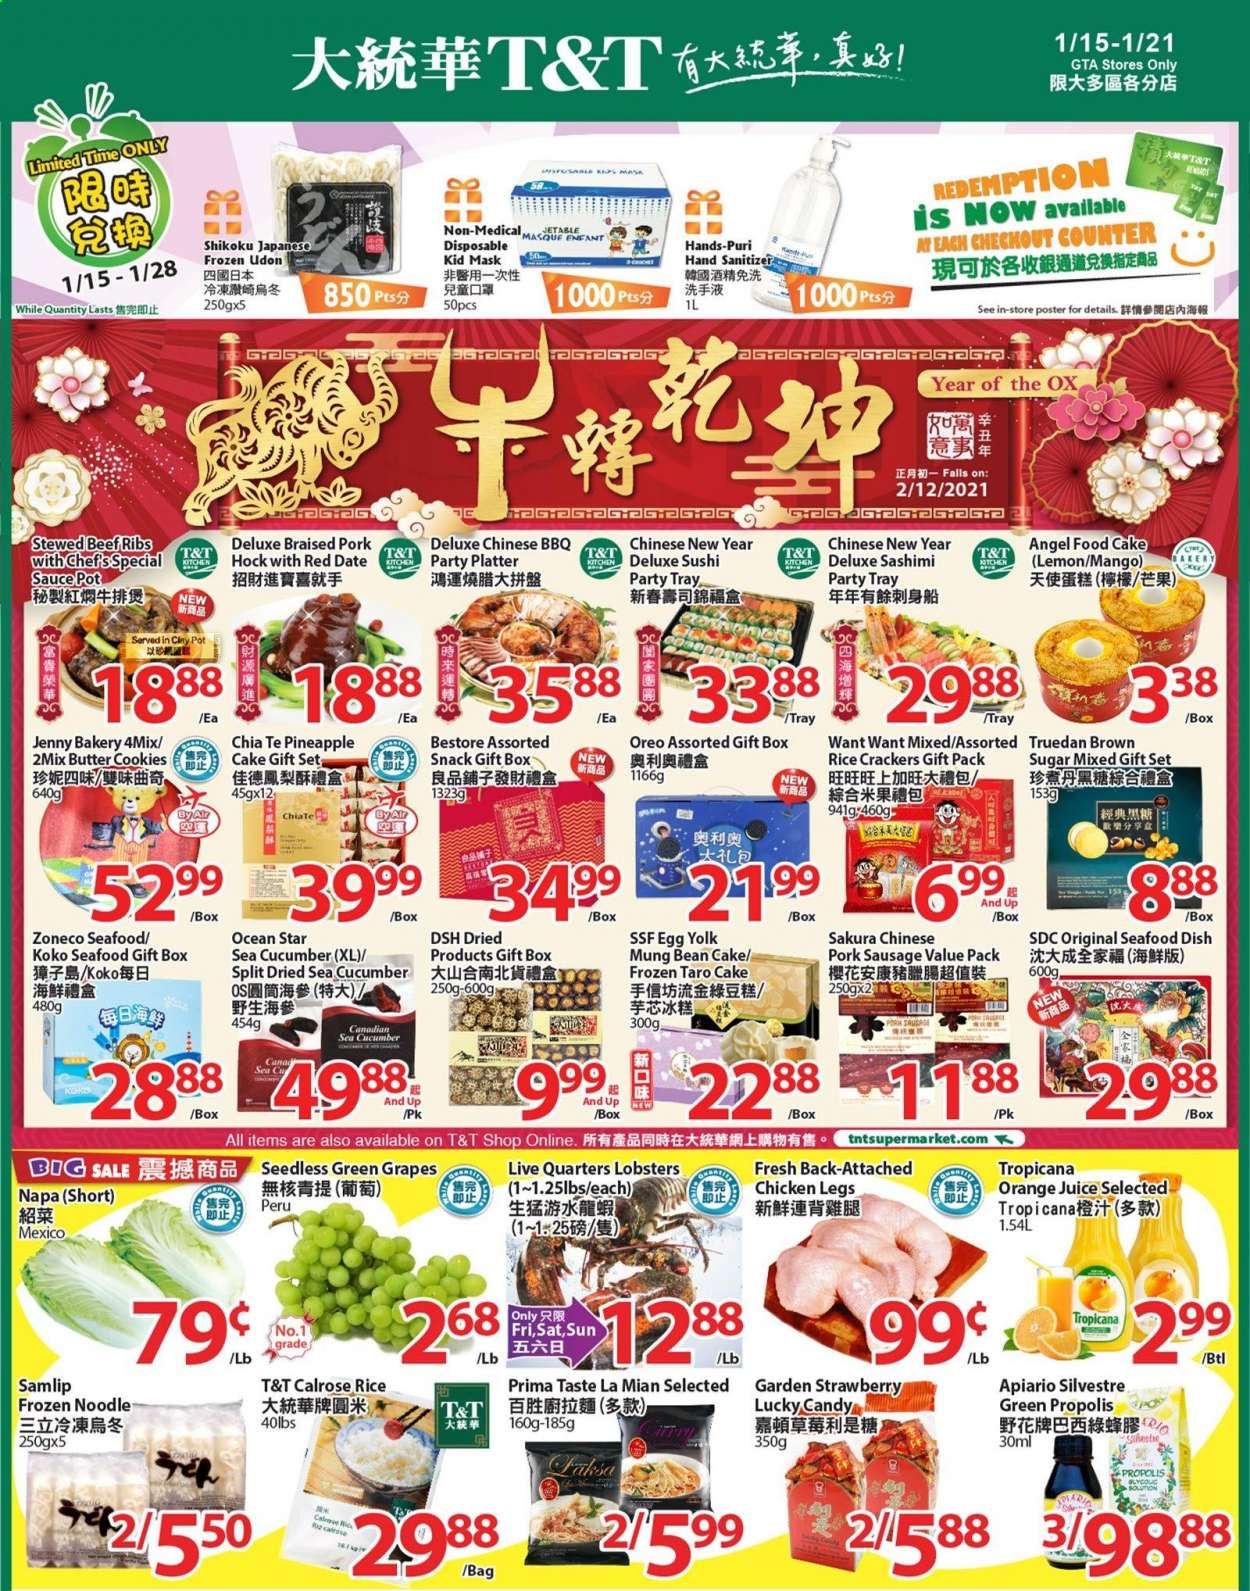 thumbnail - T&T Supermarket Flyer - January 15, 2021 - January 21, 2021 - Sales products - cake, Angel Food, pineapple tart, grapes, mango, lobster, seafood, sauce, noodles, sausage, pork sausage, eggs, cookies, butter cookies, snack, crackers, rice crackers, sugar, brown rice, orange juice, juice, chicken legs, chicken, beef meat, beef ribs, pork hock, pork meat, gift set, hand sanitizer, bag, pot, pan, pin, gift box, Oreo. Page 1.